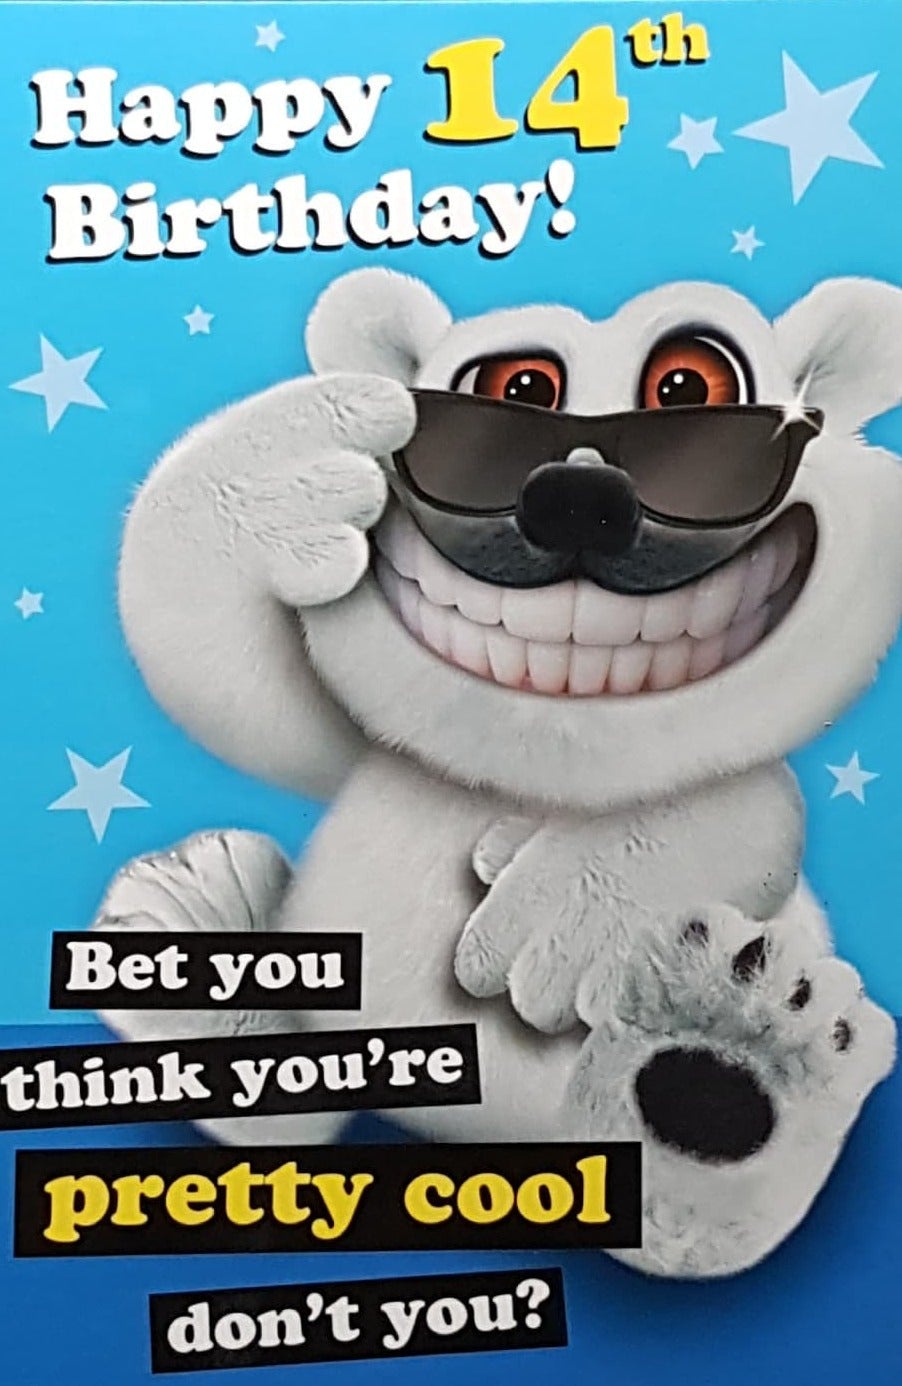 Age 14 Birthday Card - Cool Polar Bear Smiling With Sunglasses